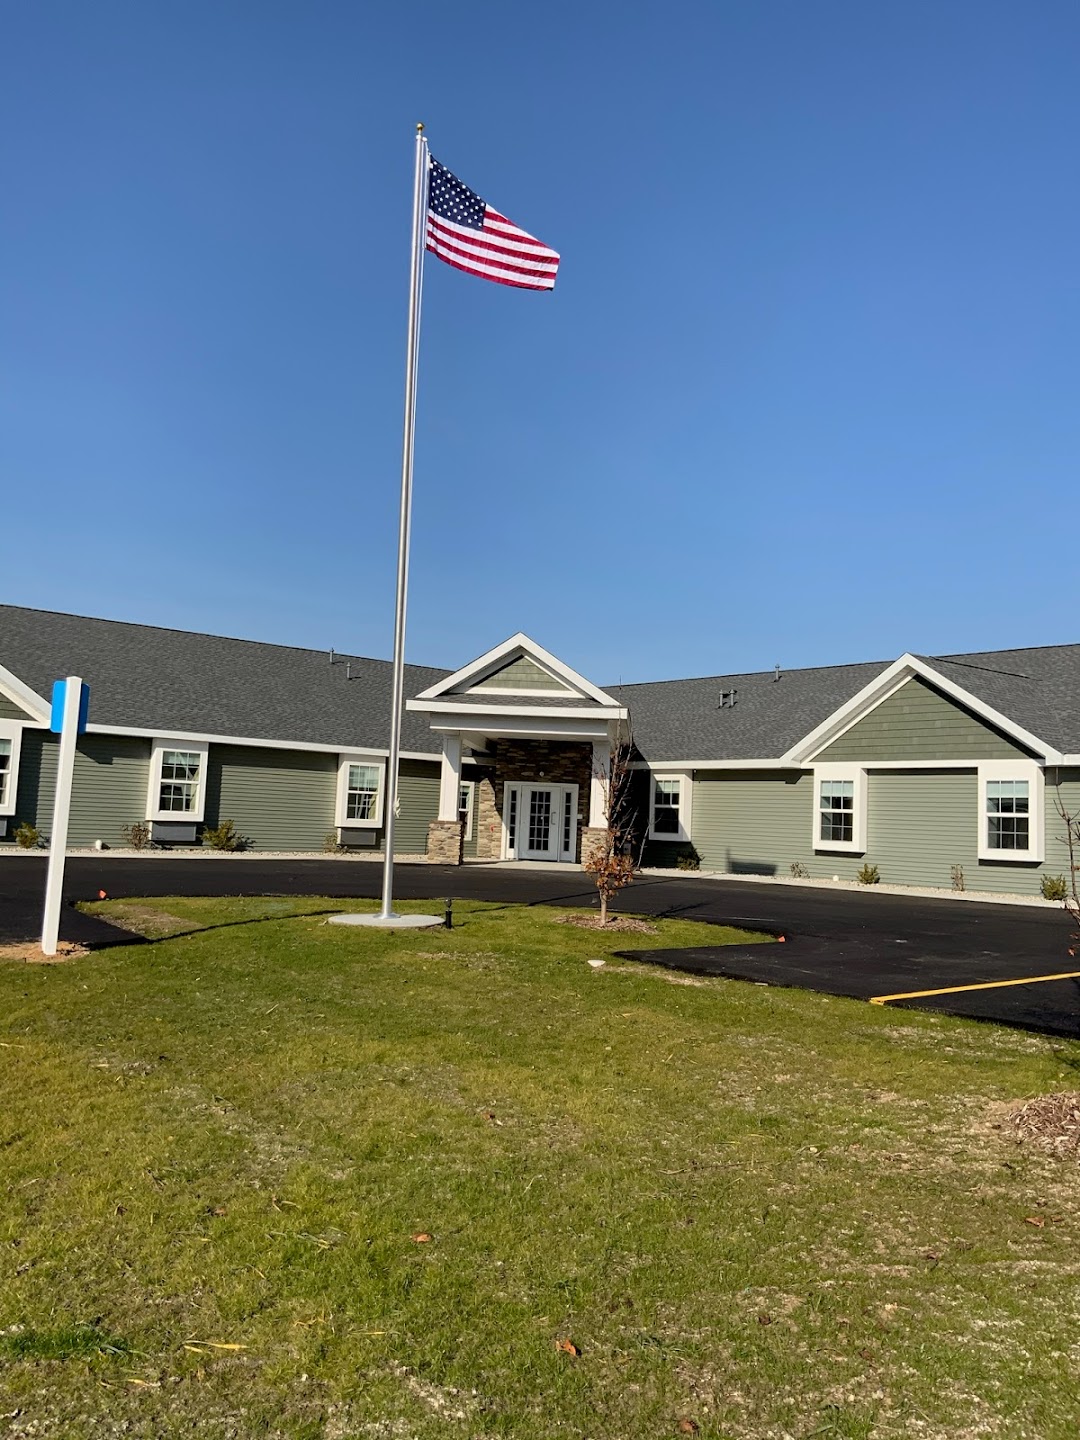 Big Rapids Fields Assisted Living & Memory Care